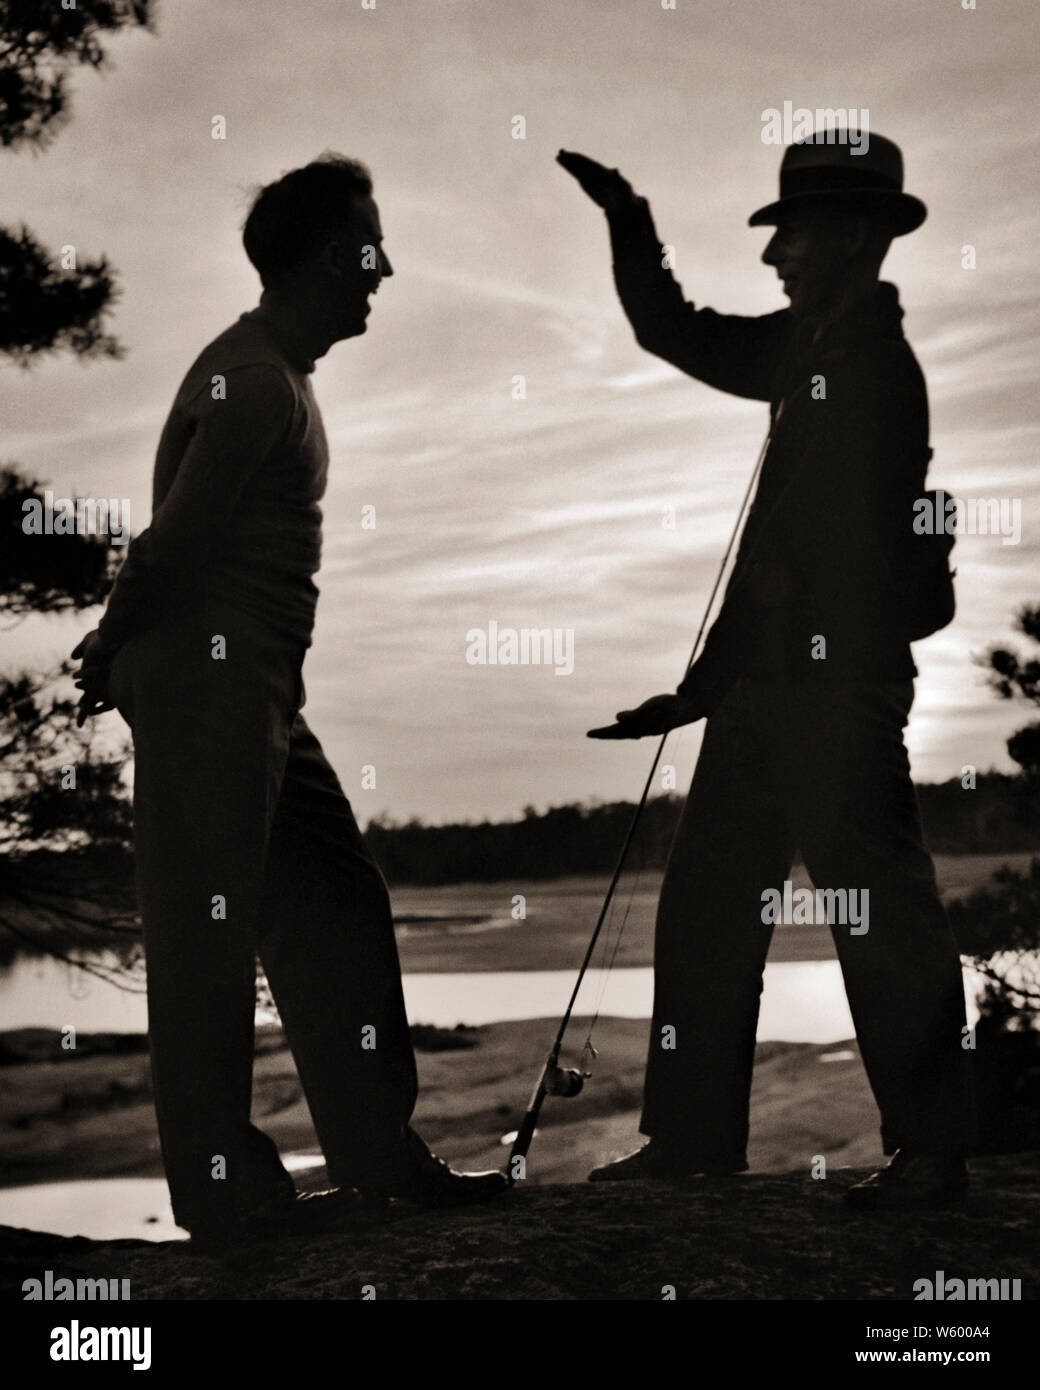 1950s ANONYMOUS SILHOUETTE OF TWO MEN ONE WEARING HAT HOLDING FISHING ROD  TELLING THE STORY OF THE BIG ONE THAT GOT AWAY - s2663 HAR001 HARS LEISURE  SILHOUETTED RECREATION COMICAL TELLING CONNECTION